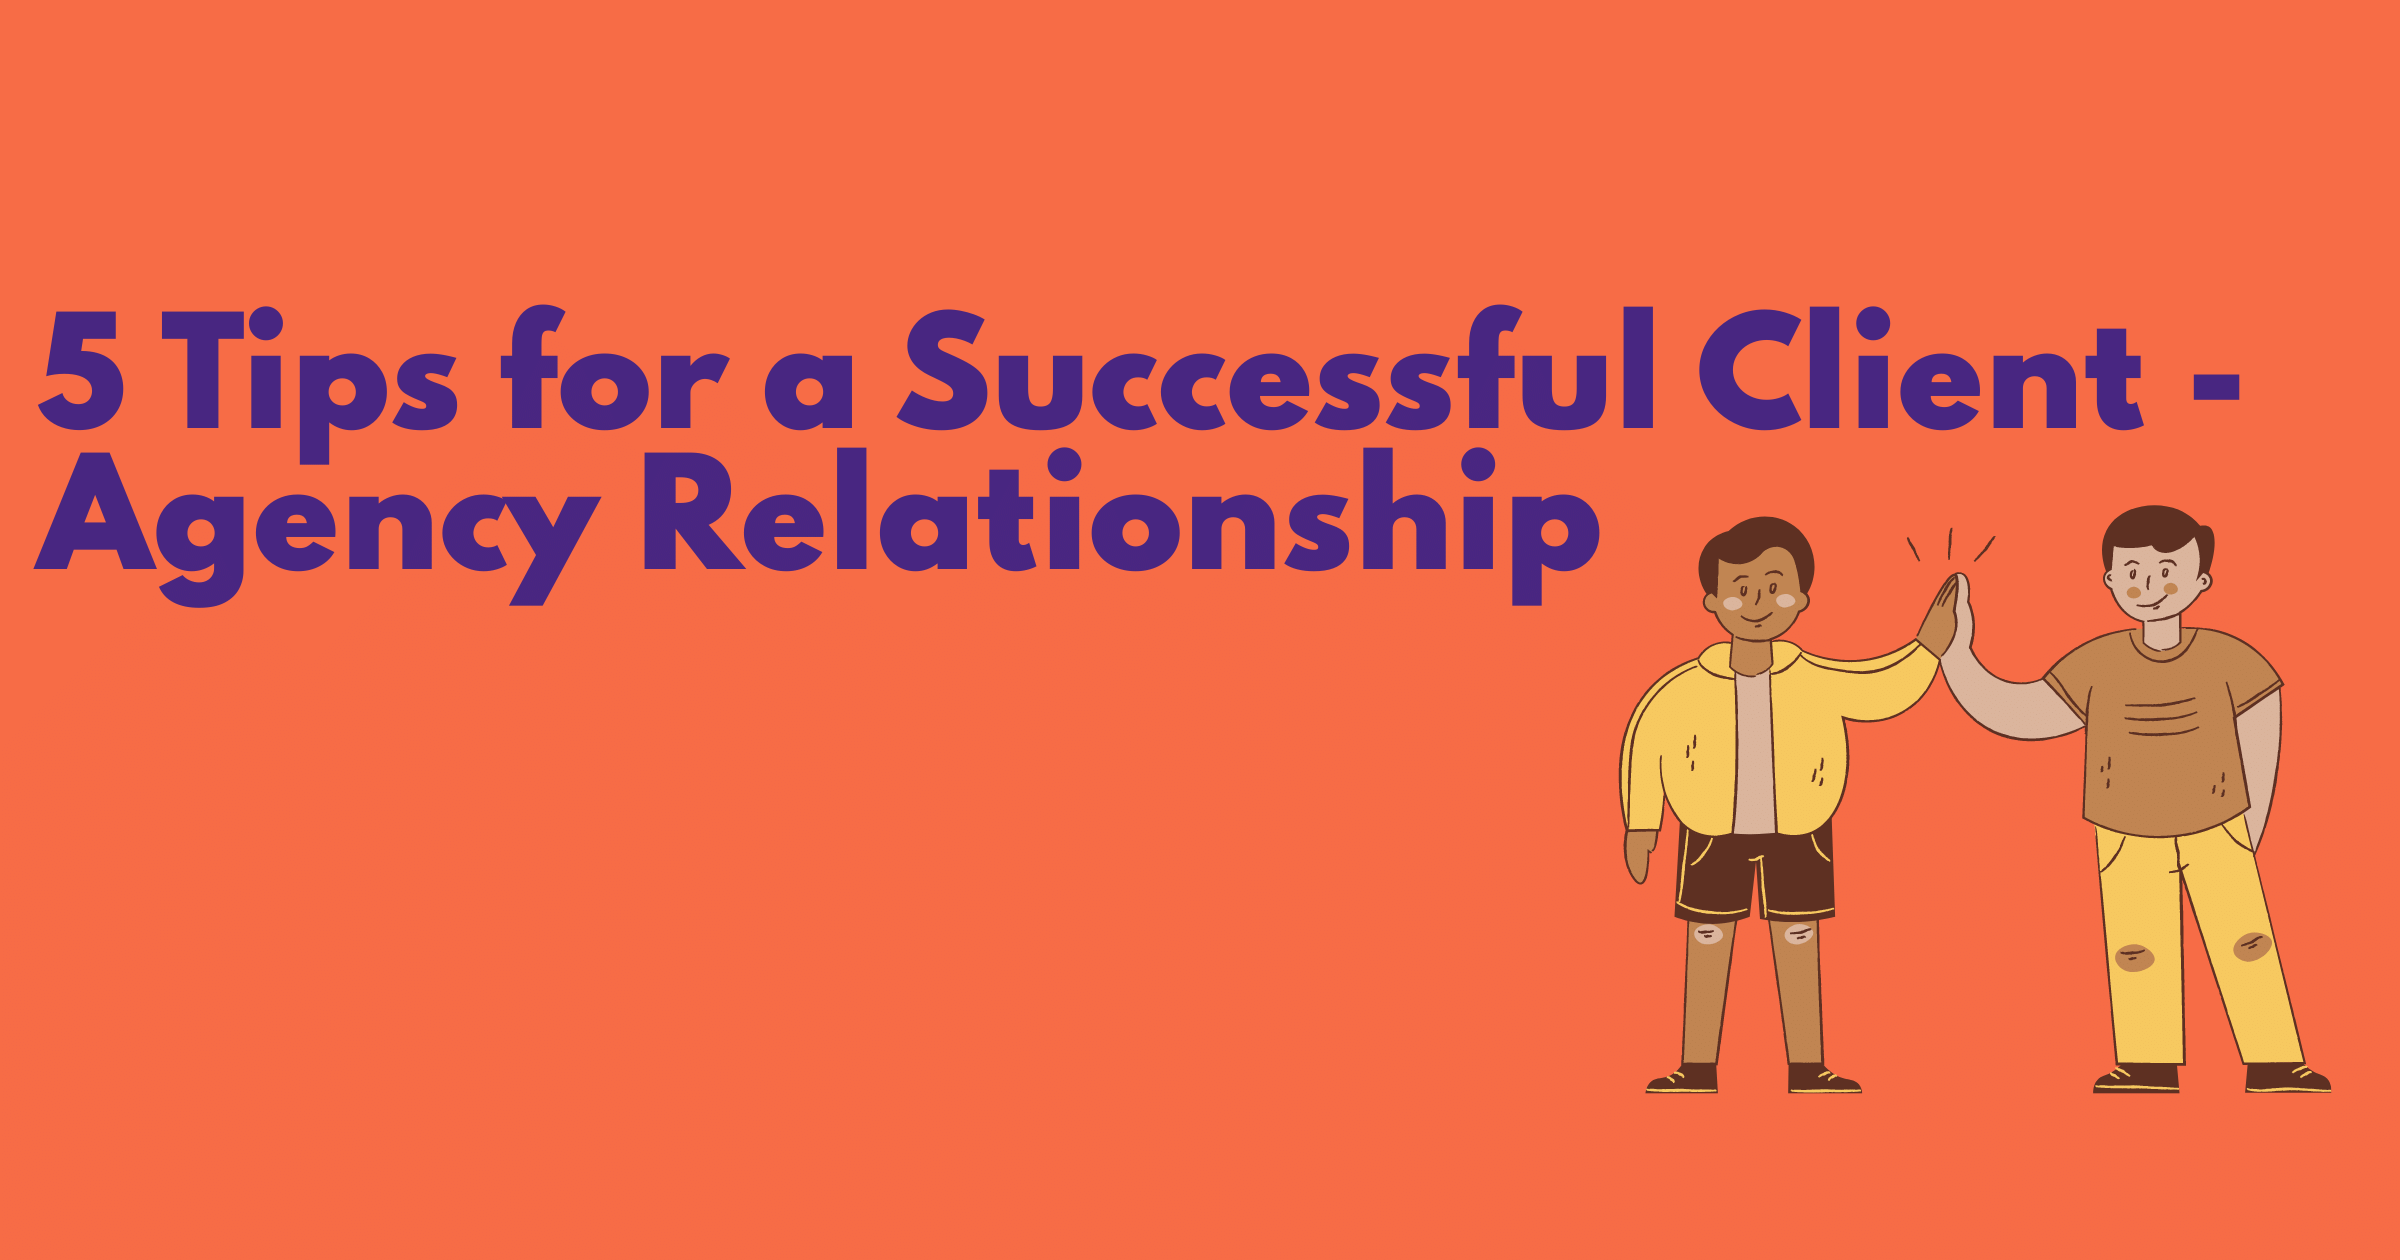 5 Tips for a Successful Client - Agency Relationship